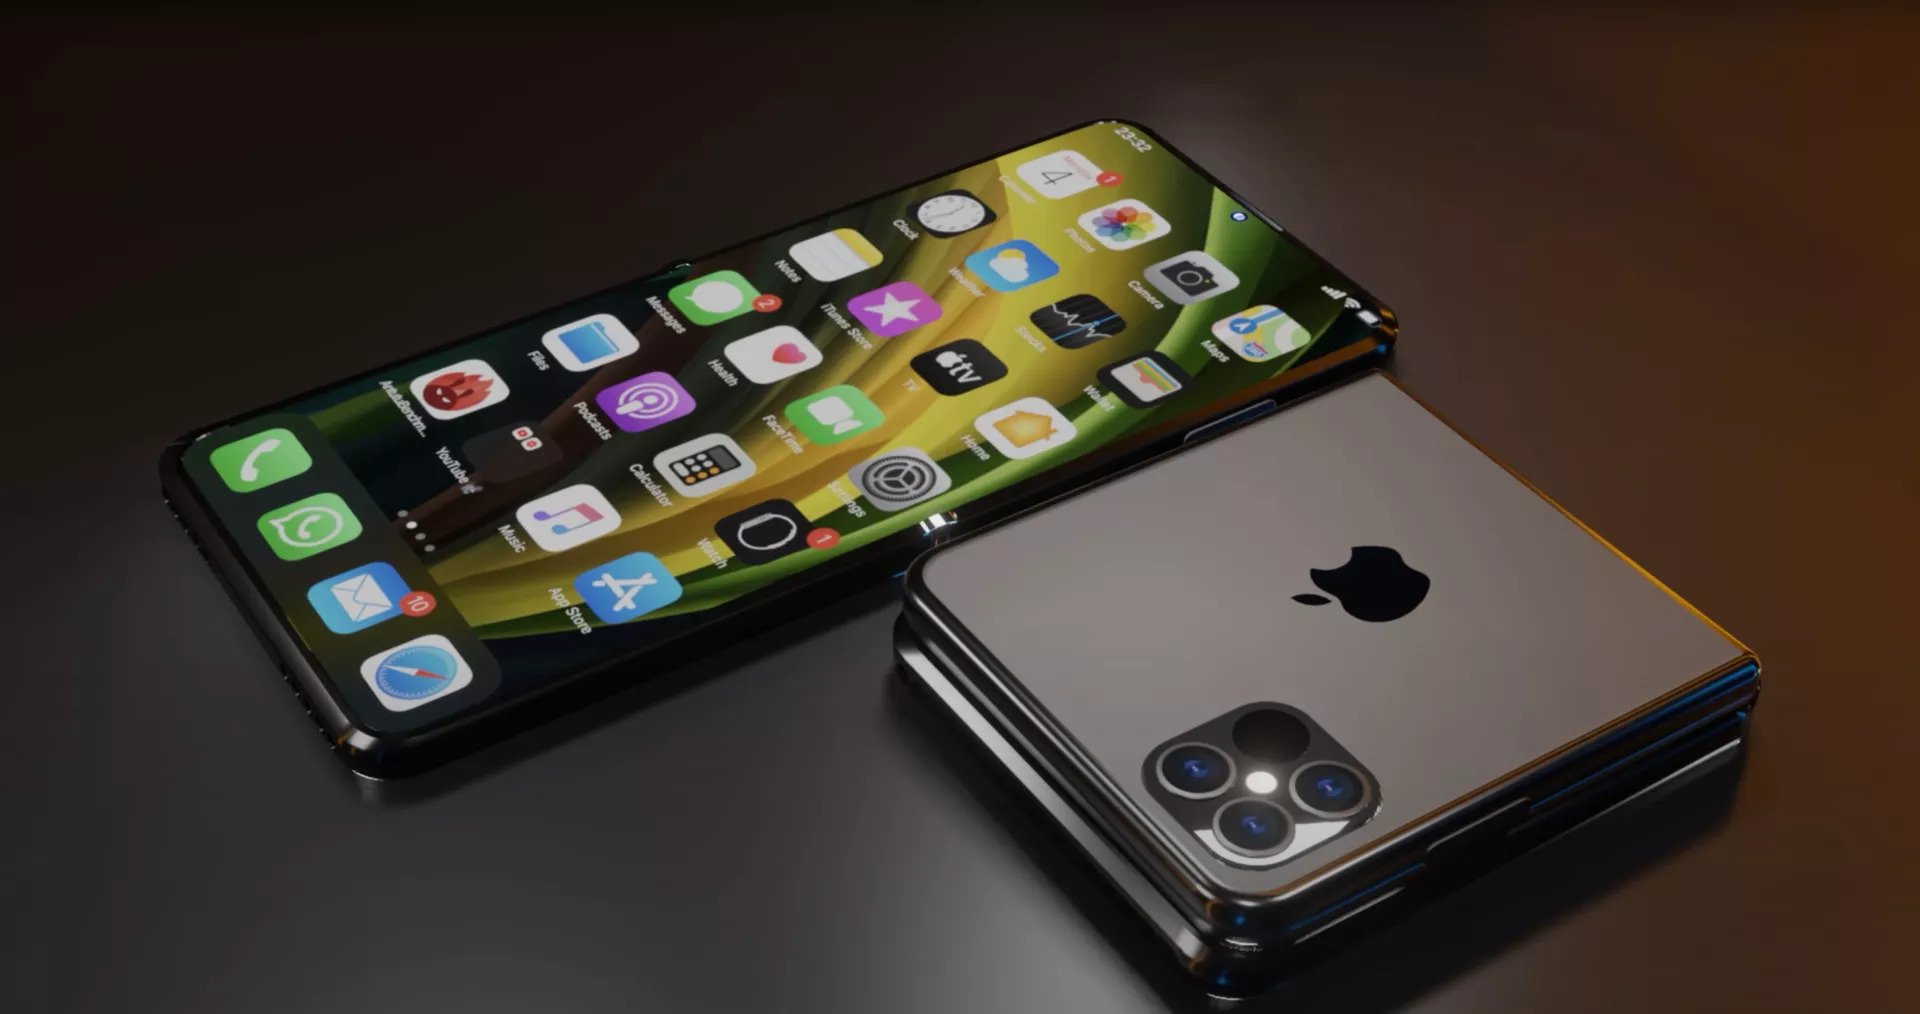 Folding iPhone concept from iOS Beta News